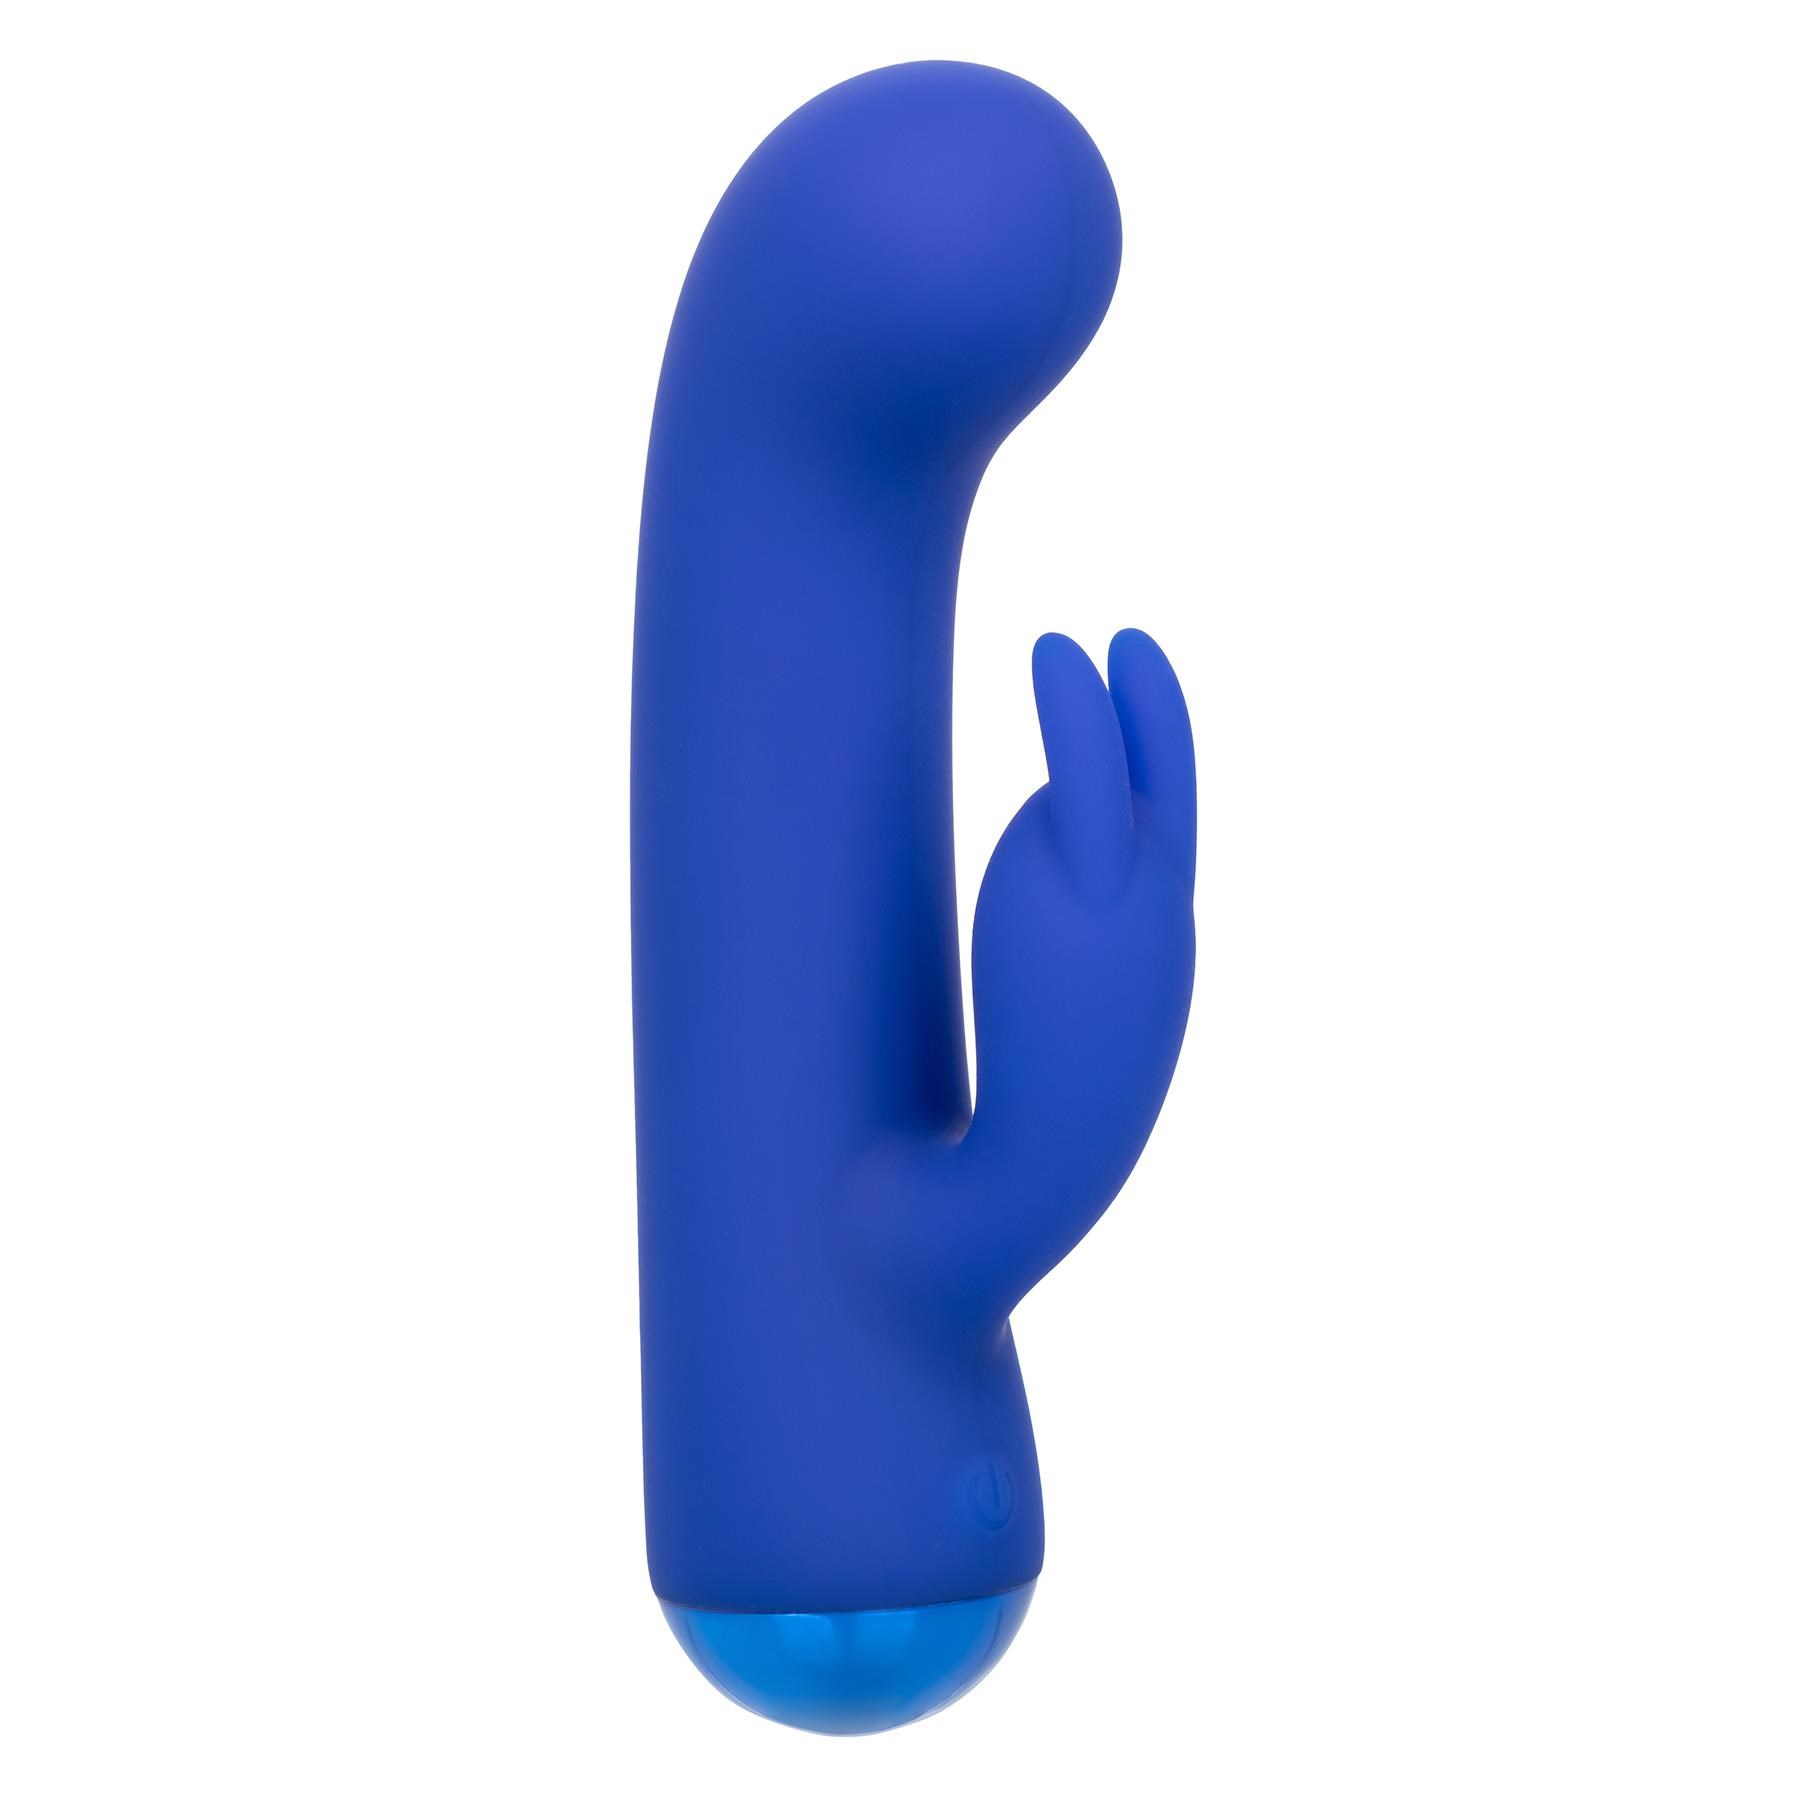 Thicc Chubby Bunny G-Spot Rabbit - Product Shot